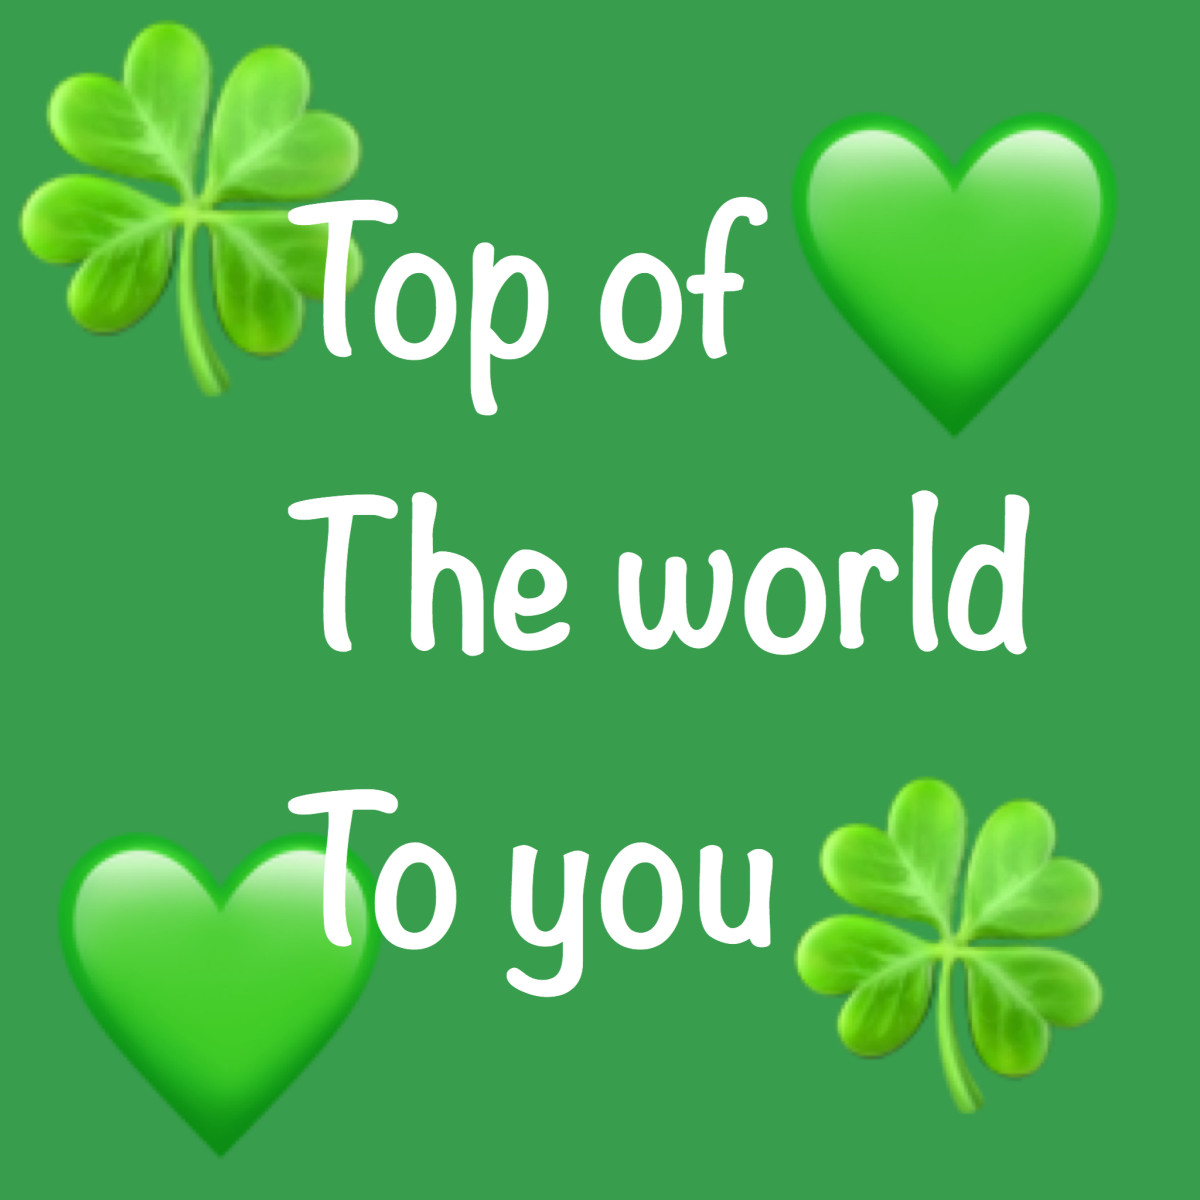 25 Funny Irish Quotes and Sayings | HubPages